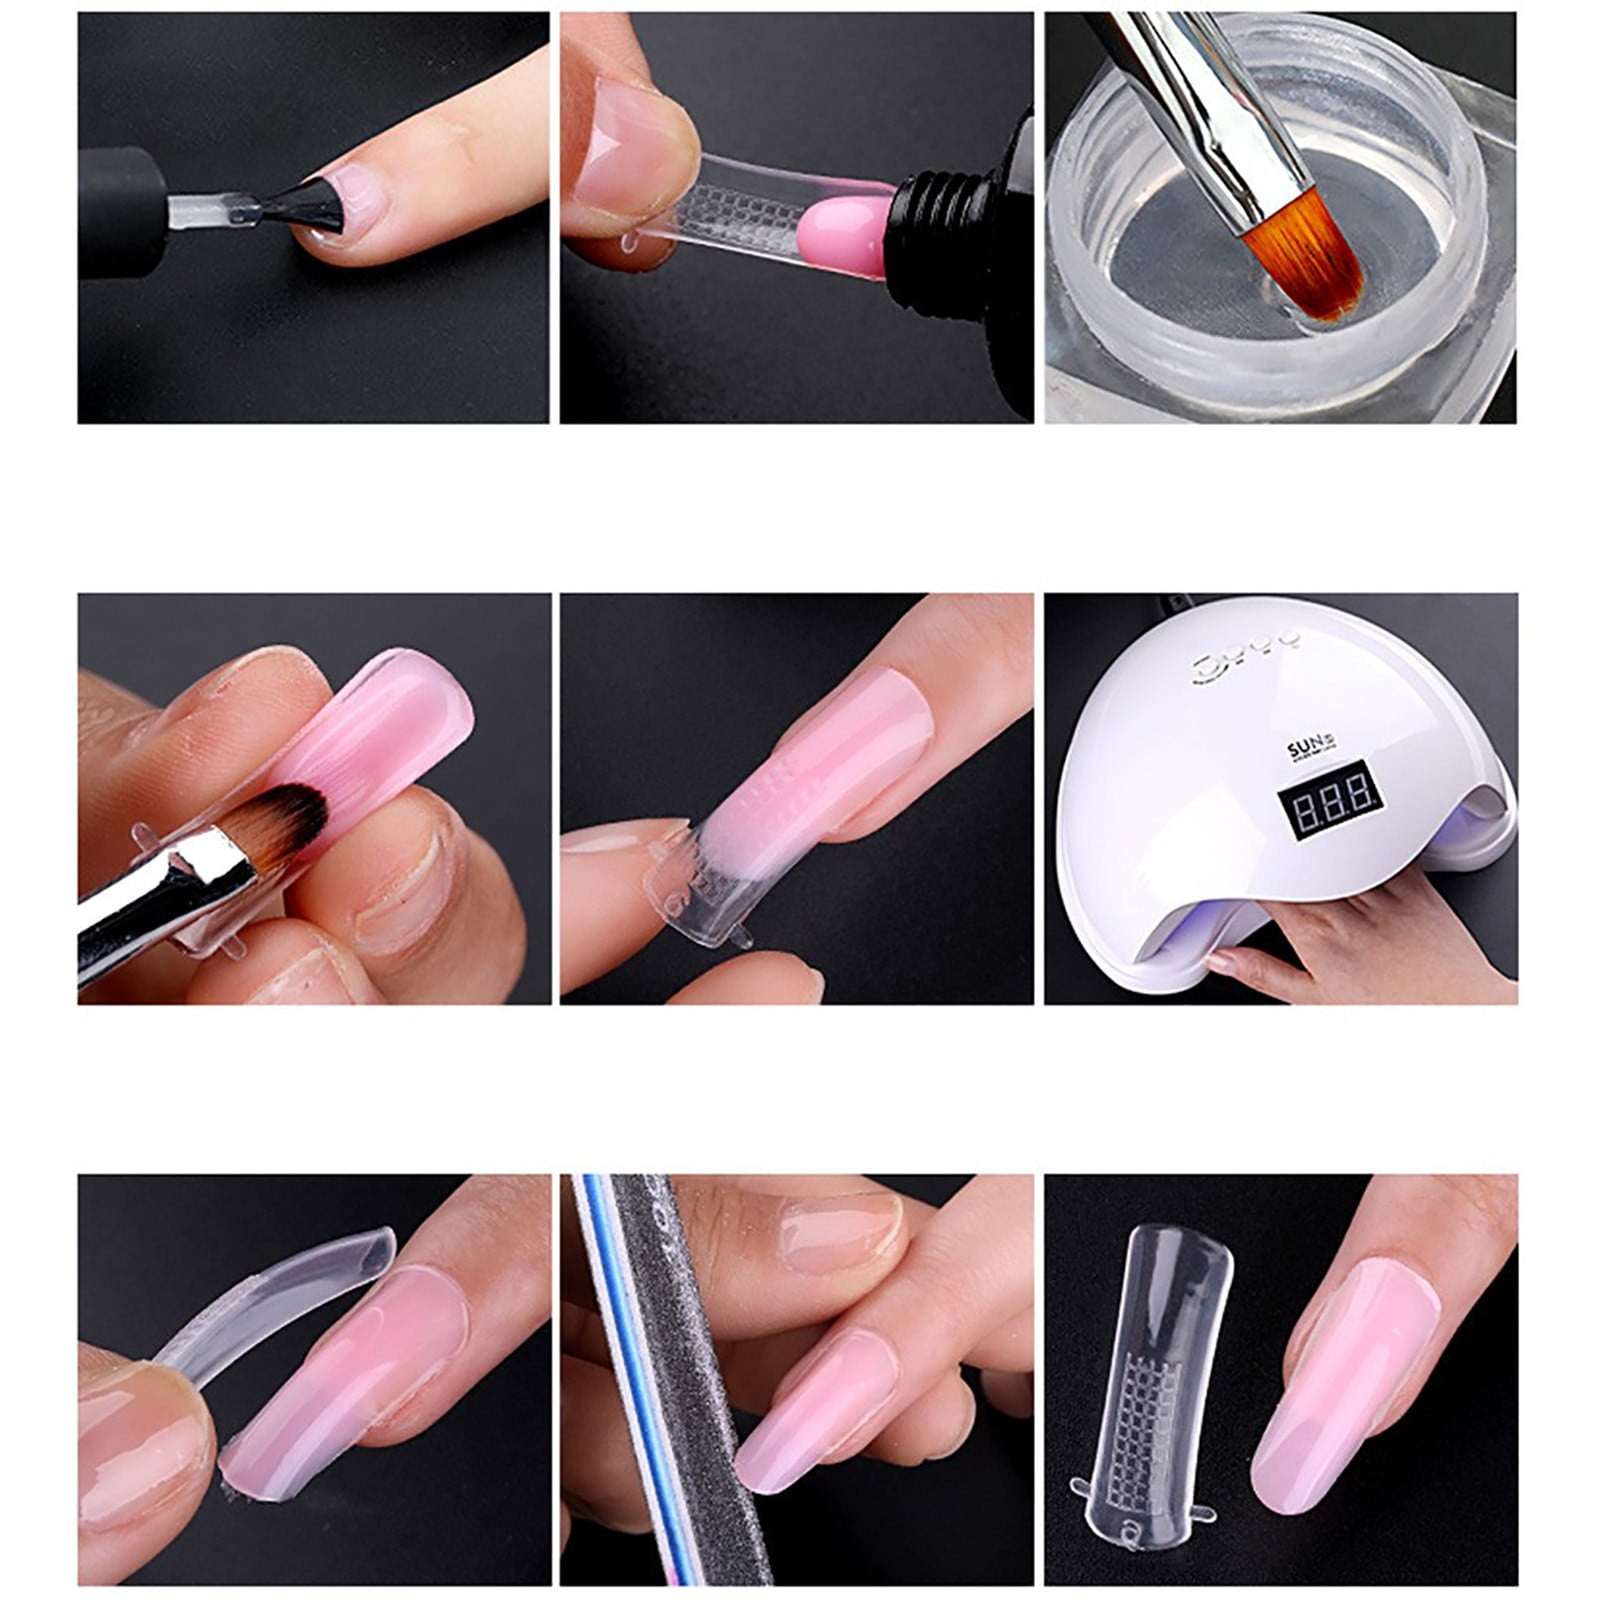 Amazon.com: Nail Drill Set Electric Nail Files, Powerful Manicure Pedicure  Kit for Removing Acrylic Nails, Gel Nails, Thinning and Smoothing Nails -  25000 RPM : Beauty & Personal Care